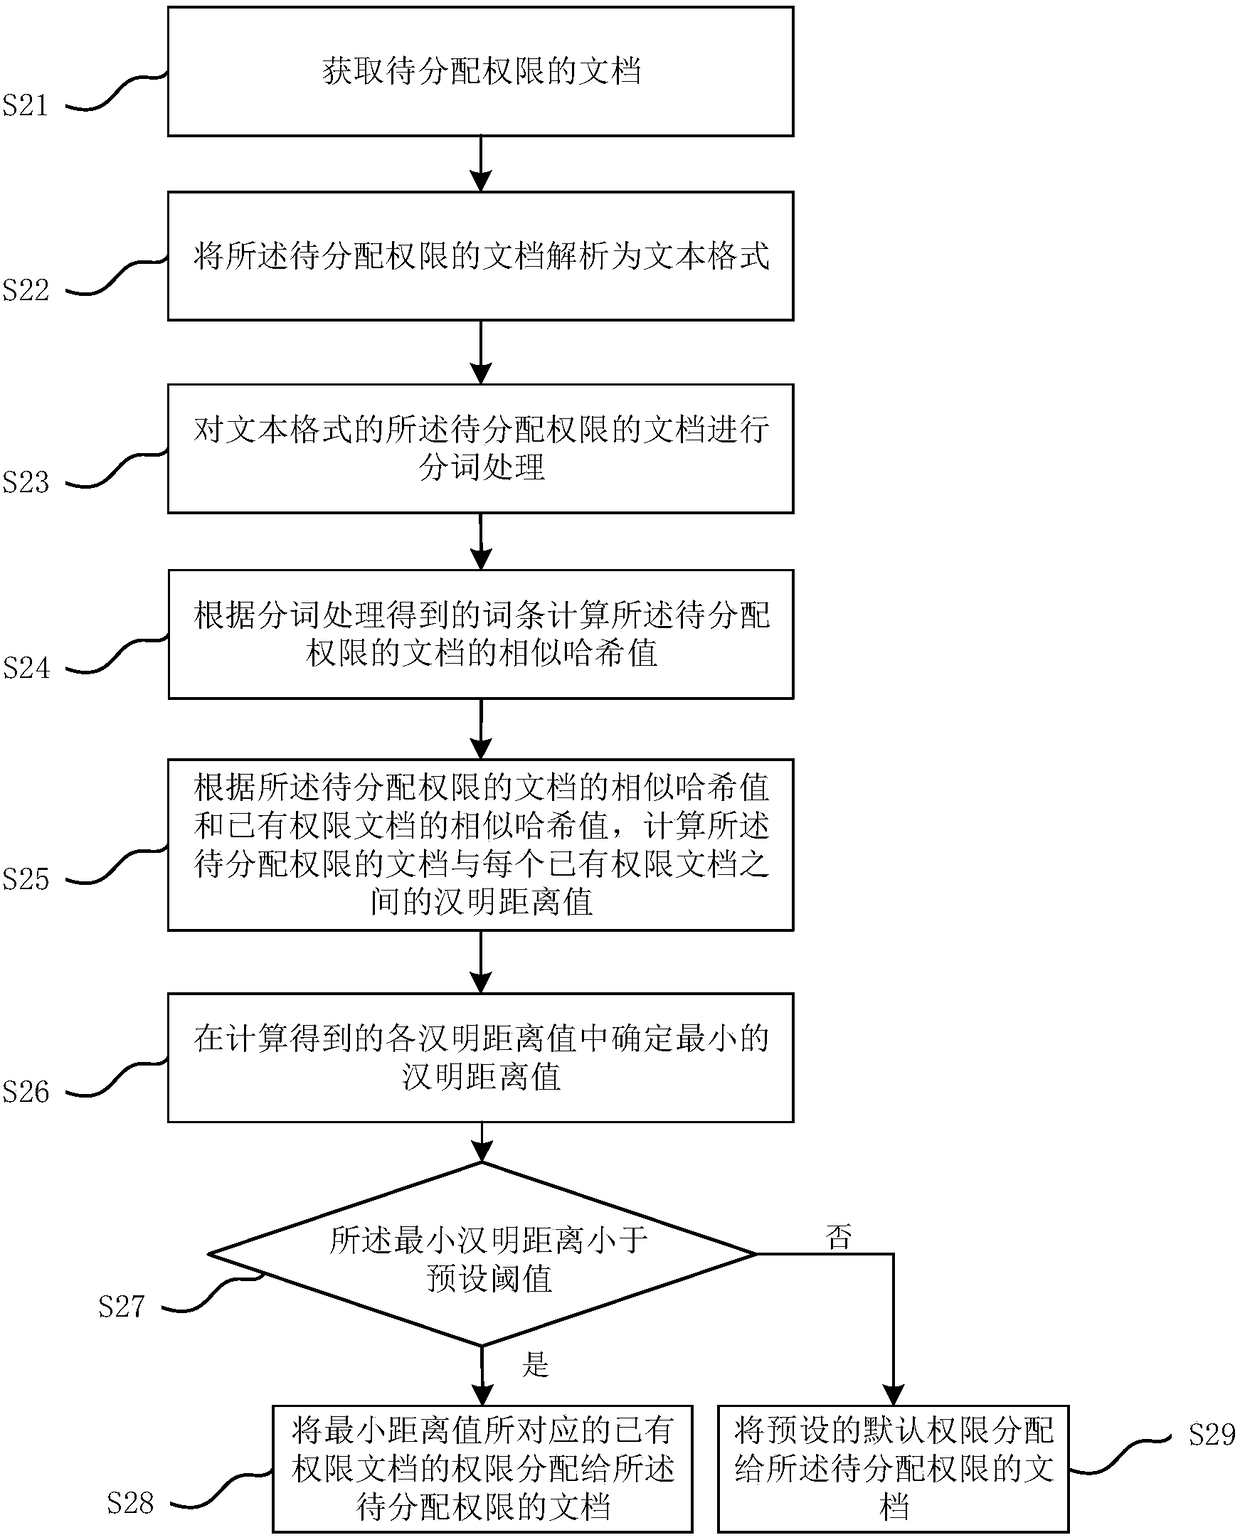 Method and device for distributing document permission